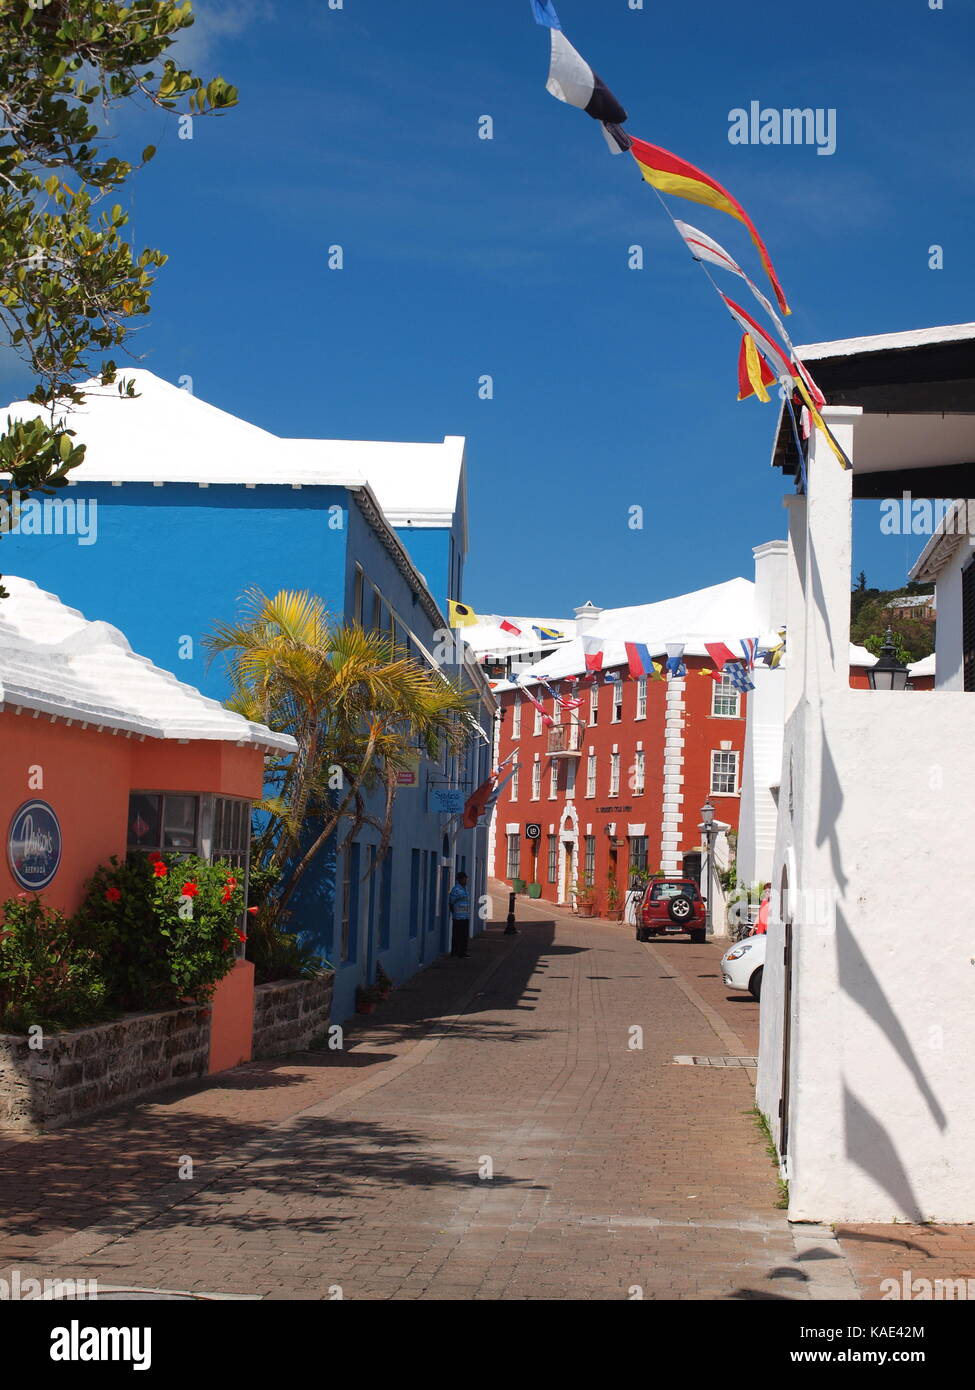 Assorted views of St. Georges, Bermuda with it's well known pastel structures and colorful decorations. Stock Photo